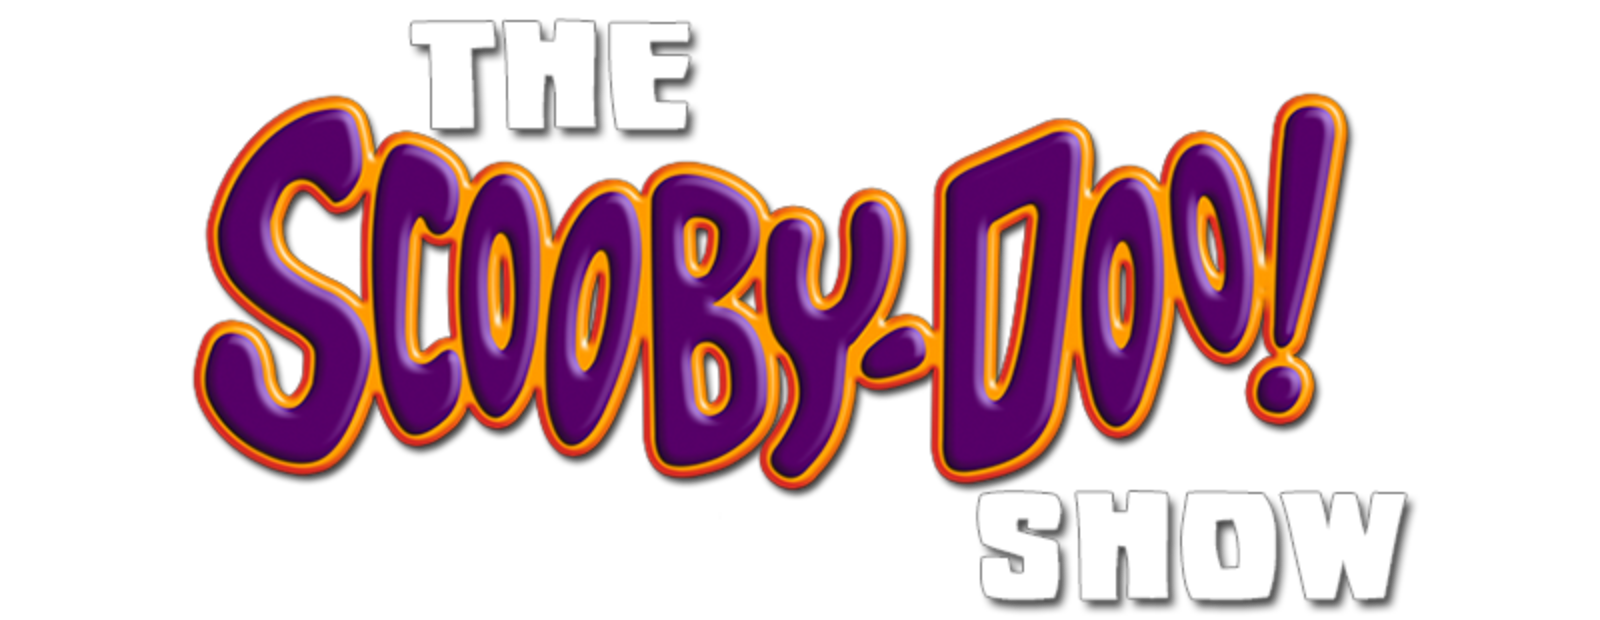 The Scooby-Doo Show Complete 